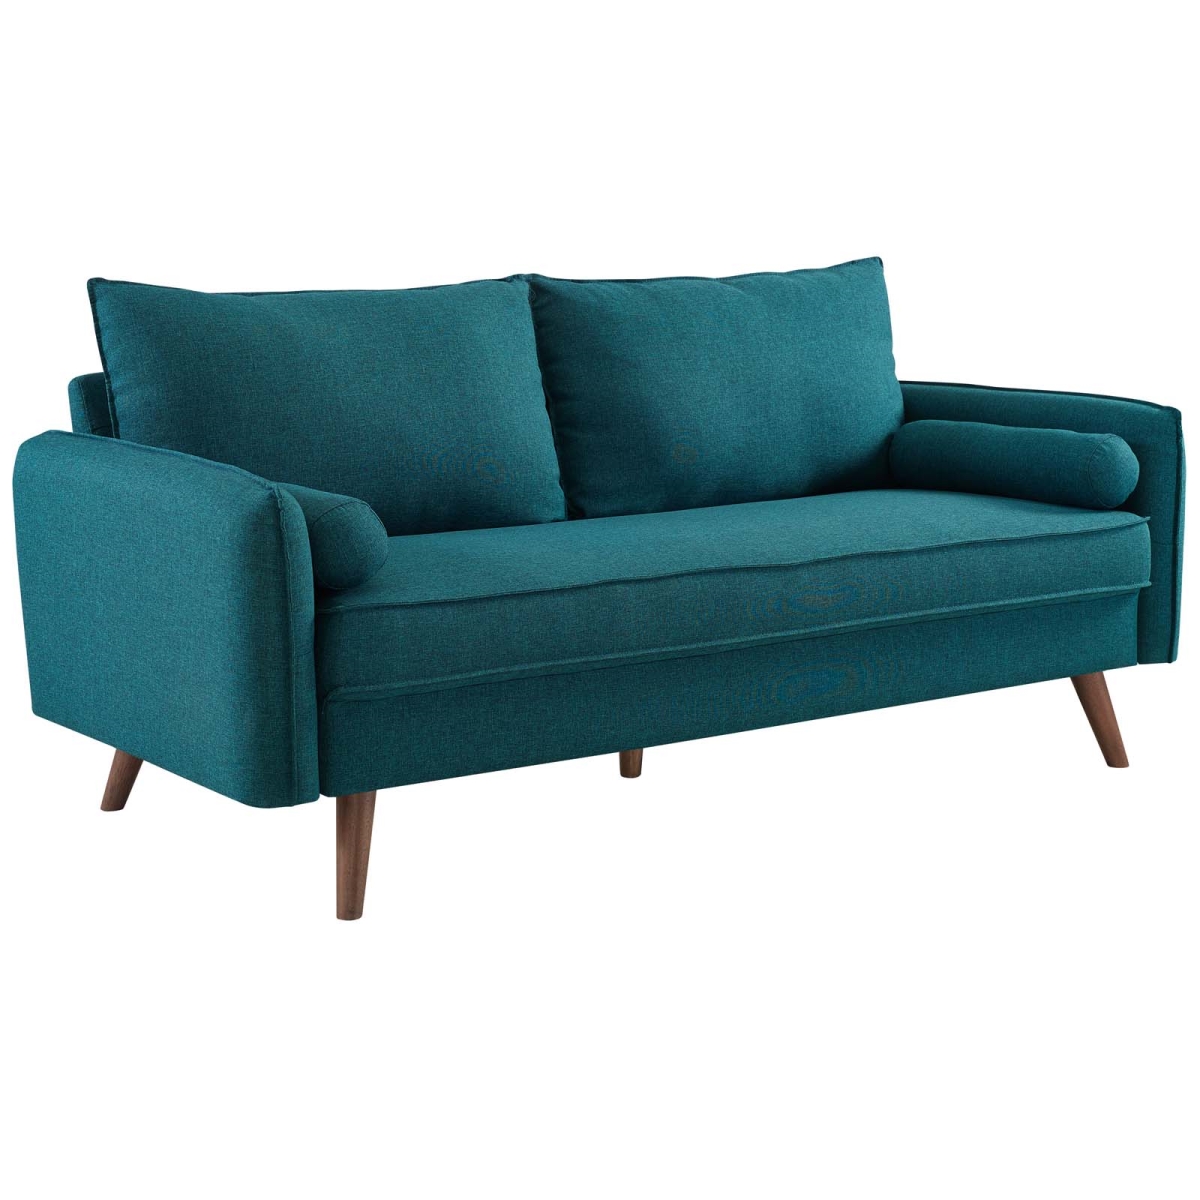 Eei-3092-tea Revive Upholstered Fabric Sofa - Teal, 33.5 X 72 X 32.5 In.